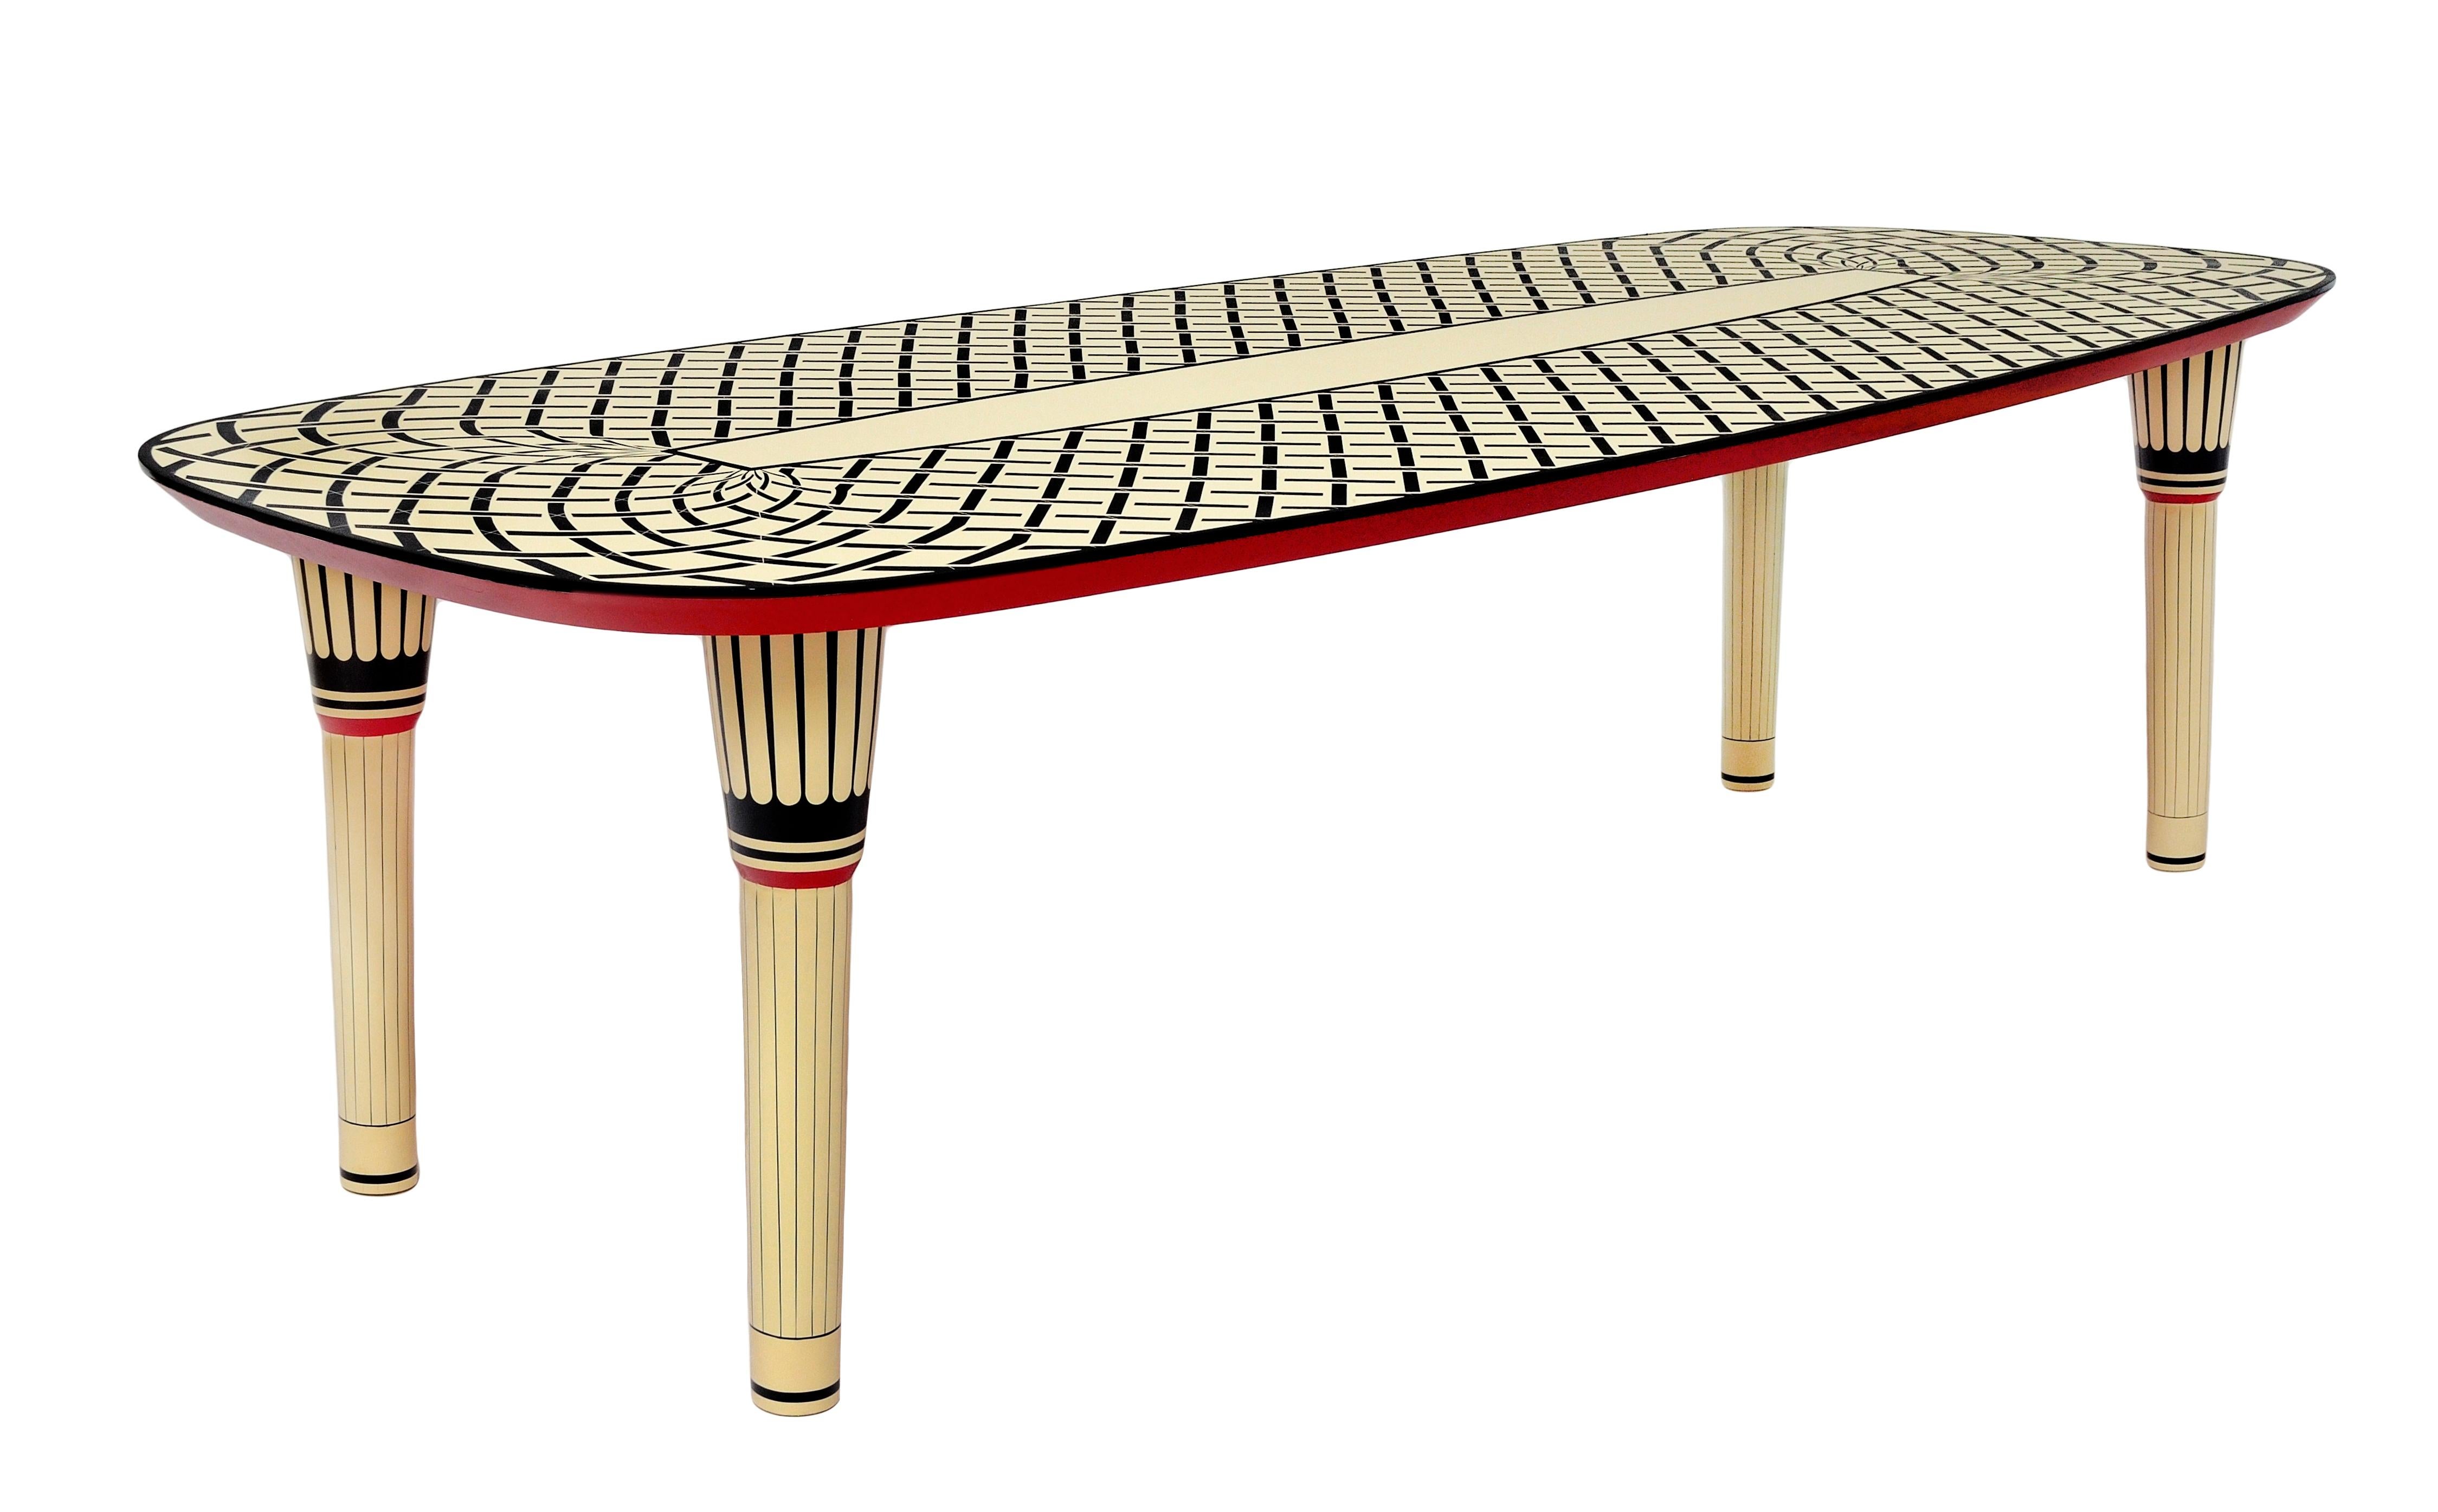 Aelita Large Marquetry Dining Table by Matteo Cibic is a magnificent dining table for eight with graphic appeal complimented by glimpses of scarlet. Match it with easy street for an intimate dinner statement.

India's handicrafts are as multifarious